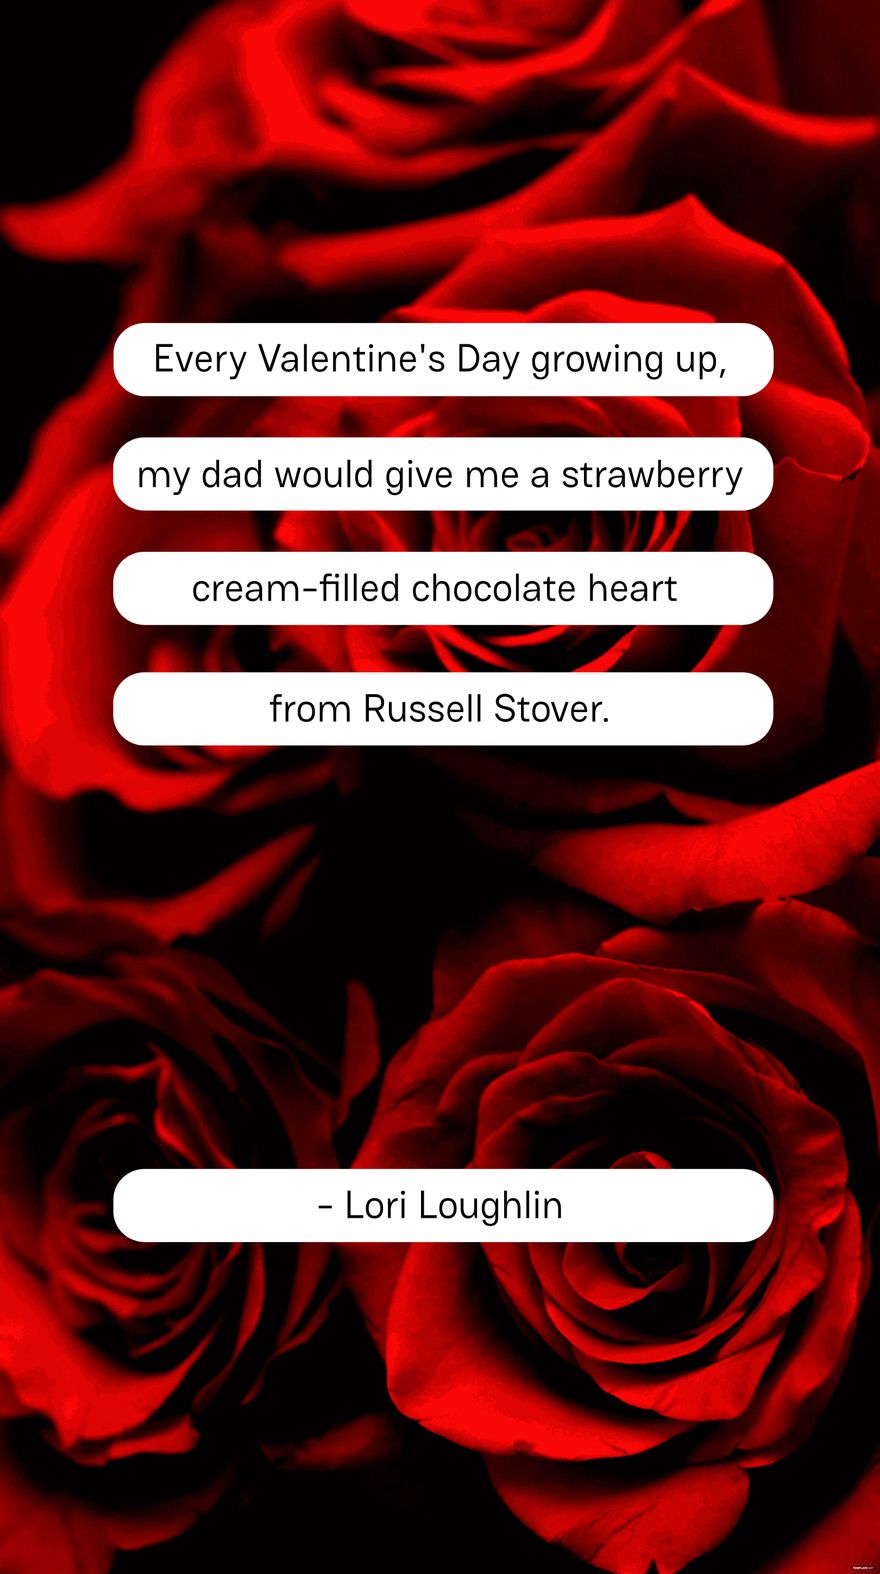 Free Lori Loughlin - Every Valentine's Day growing up, my dad would give me a strawberry cream-filled chocolate heart from Russell Stover. in JPEG